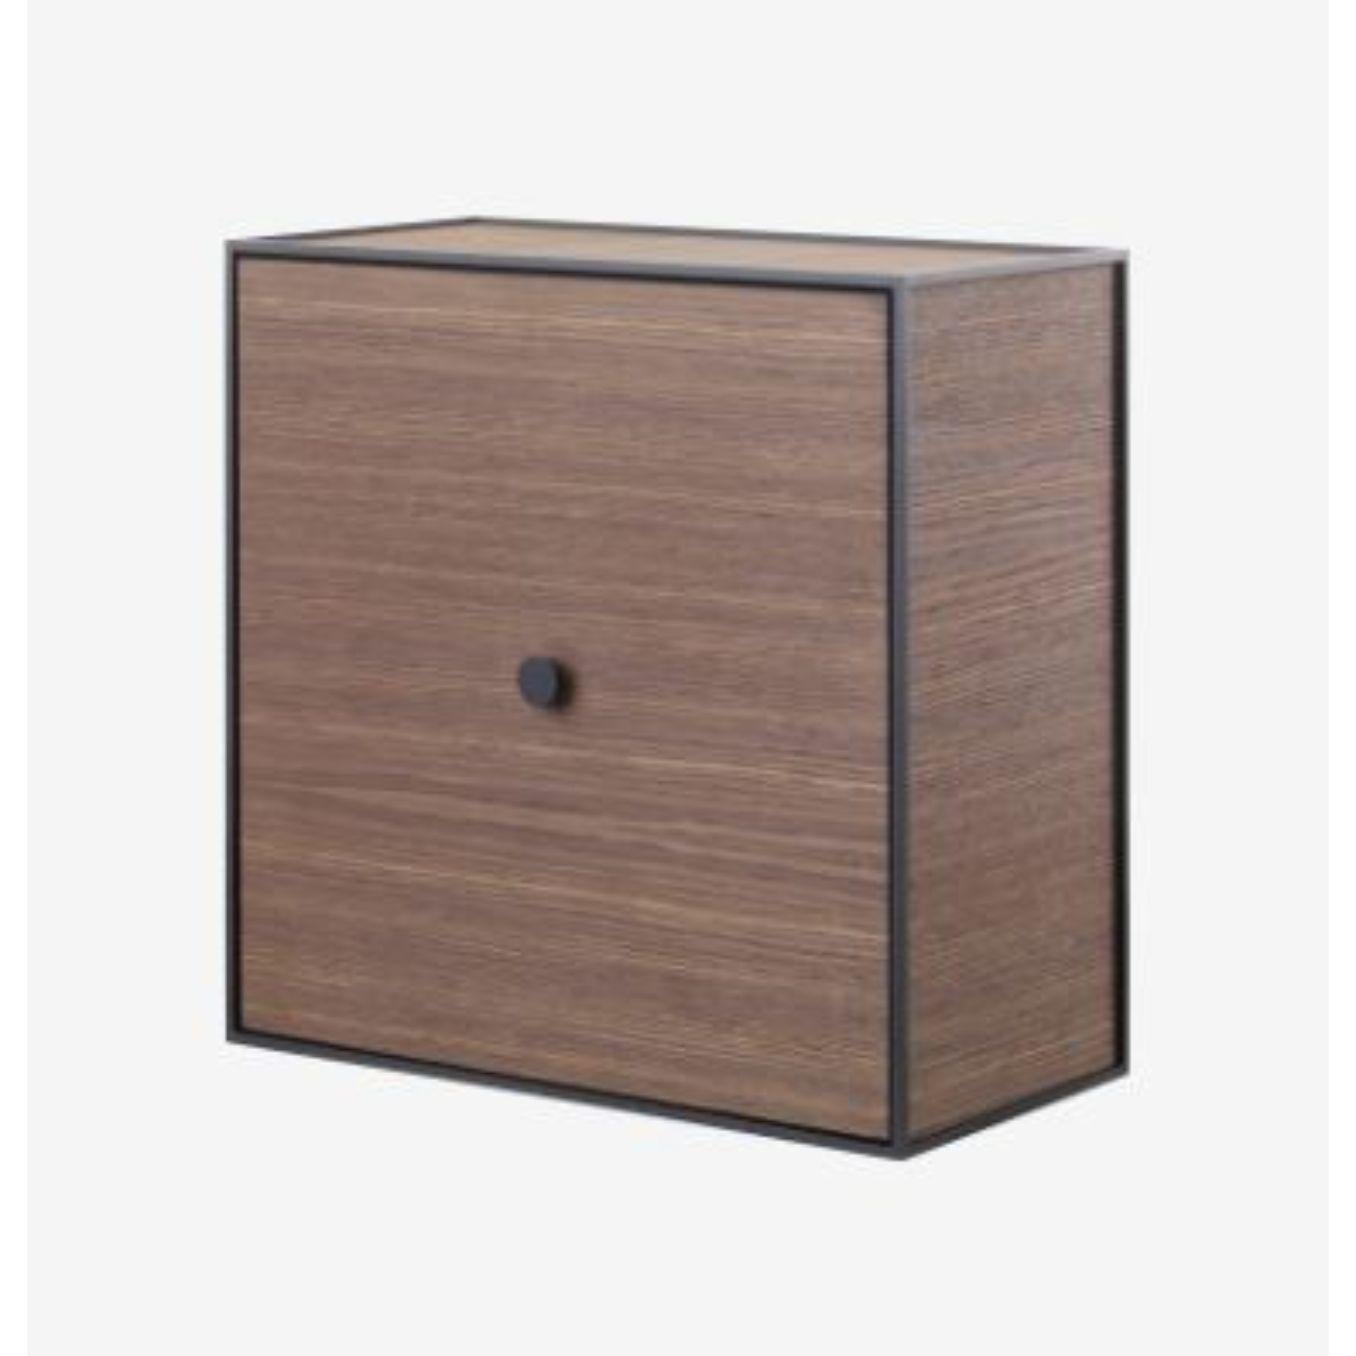 42 smoked oak frame box with door by Lassen
Dimensions: D 42 x W 21 x H 42 cm 
Materials: Finér, melamin, melamin, melamine, metal, veneer, oak
Also available in different colours and dimensions. 
Weight: 11.50 kg.

By Lassen is a Danish